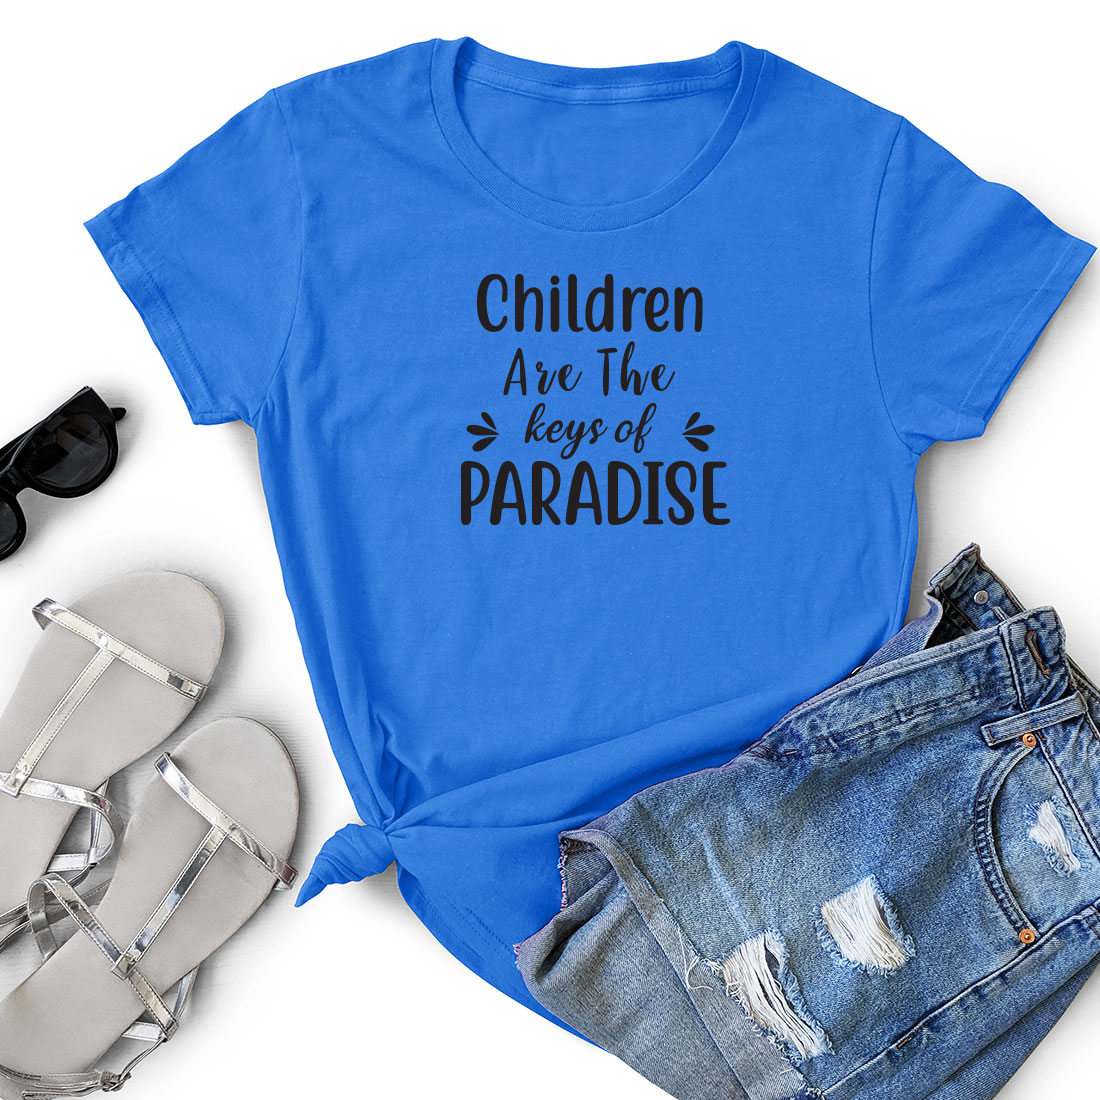 T - shirt that says children are the keys of paradise.